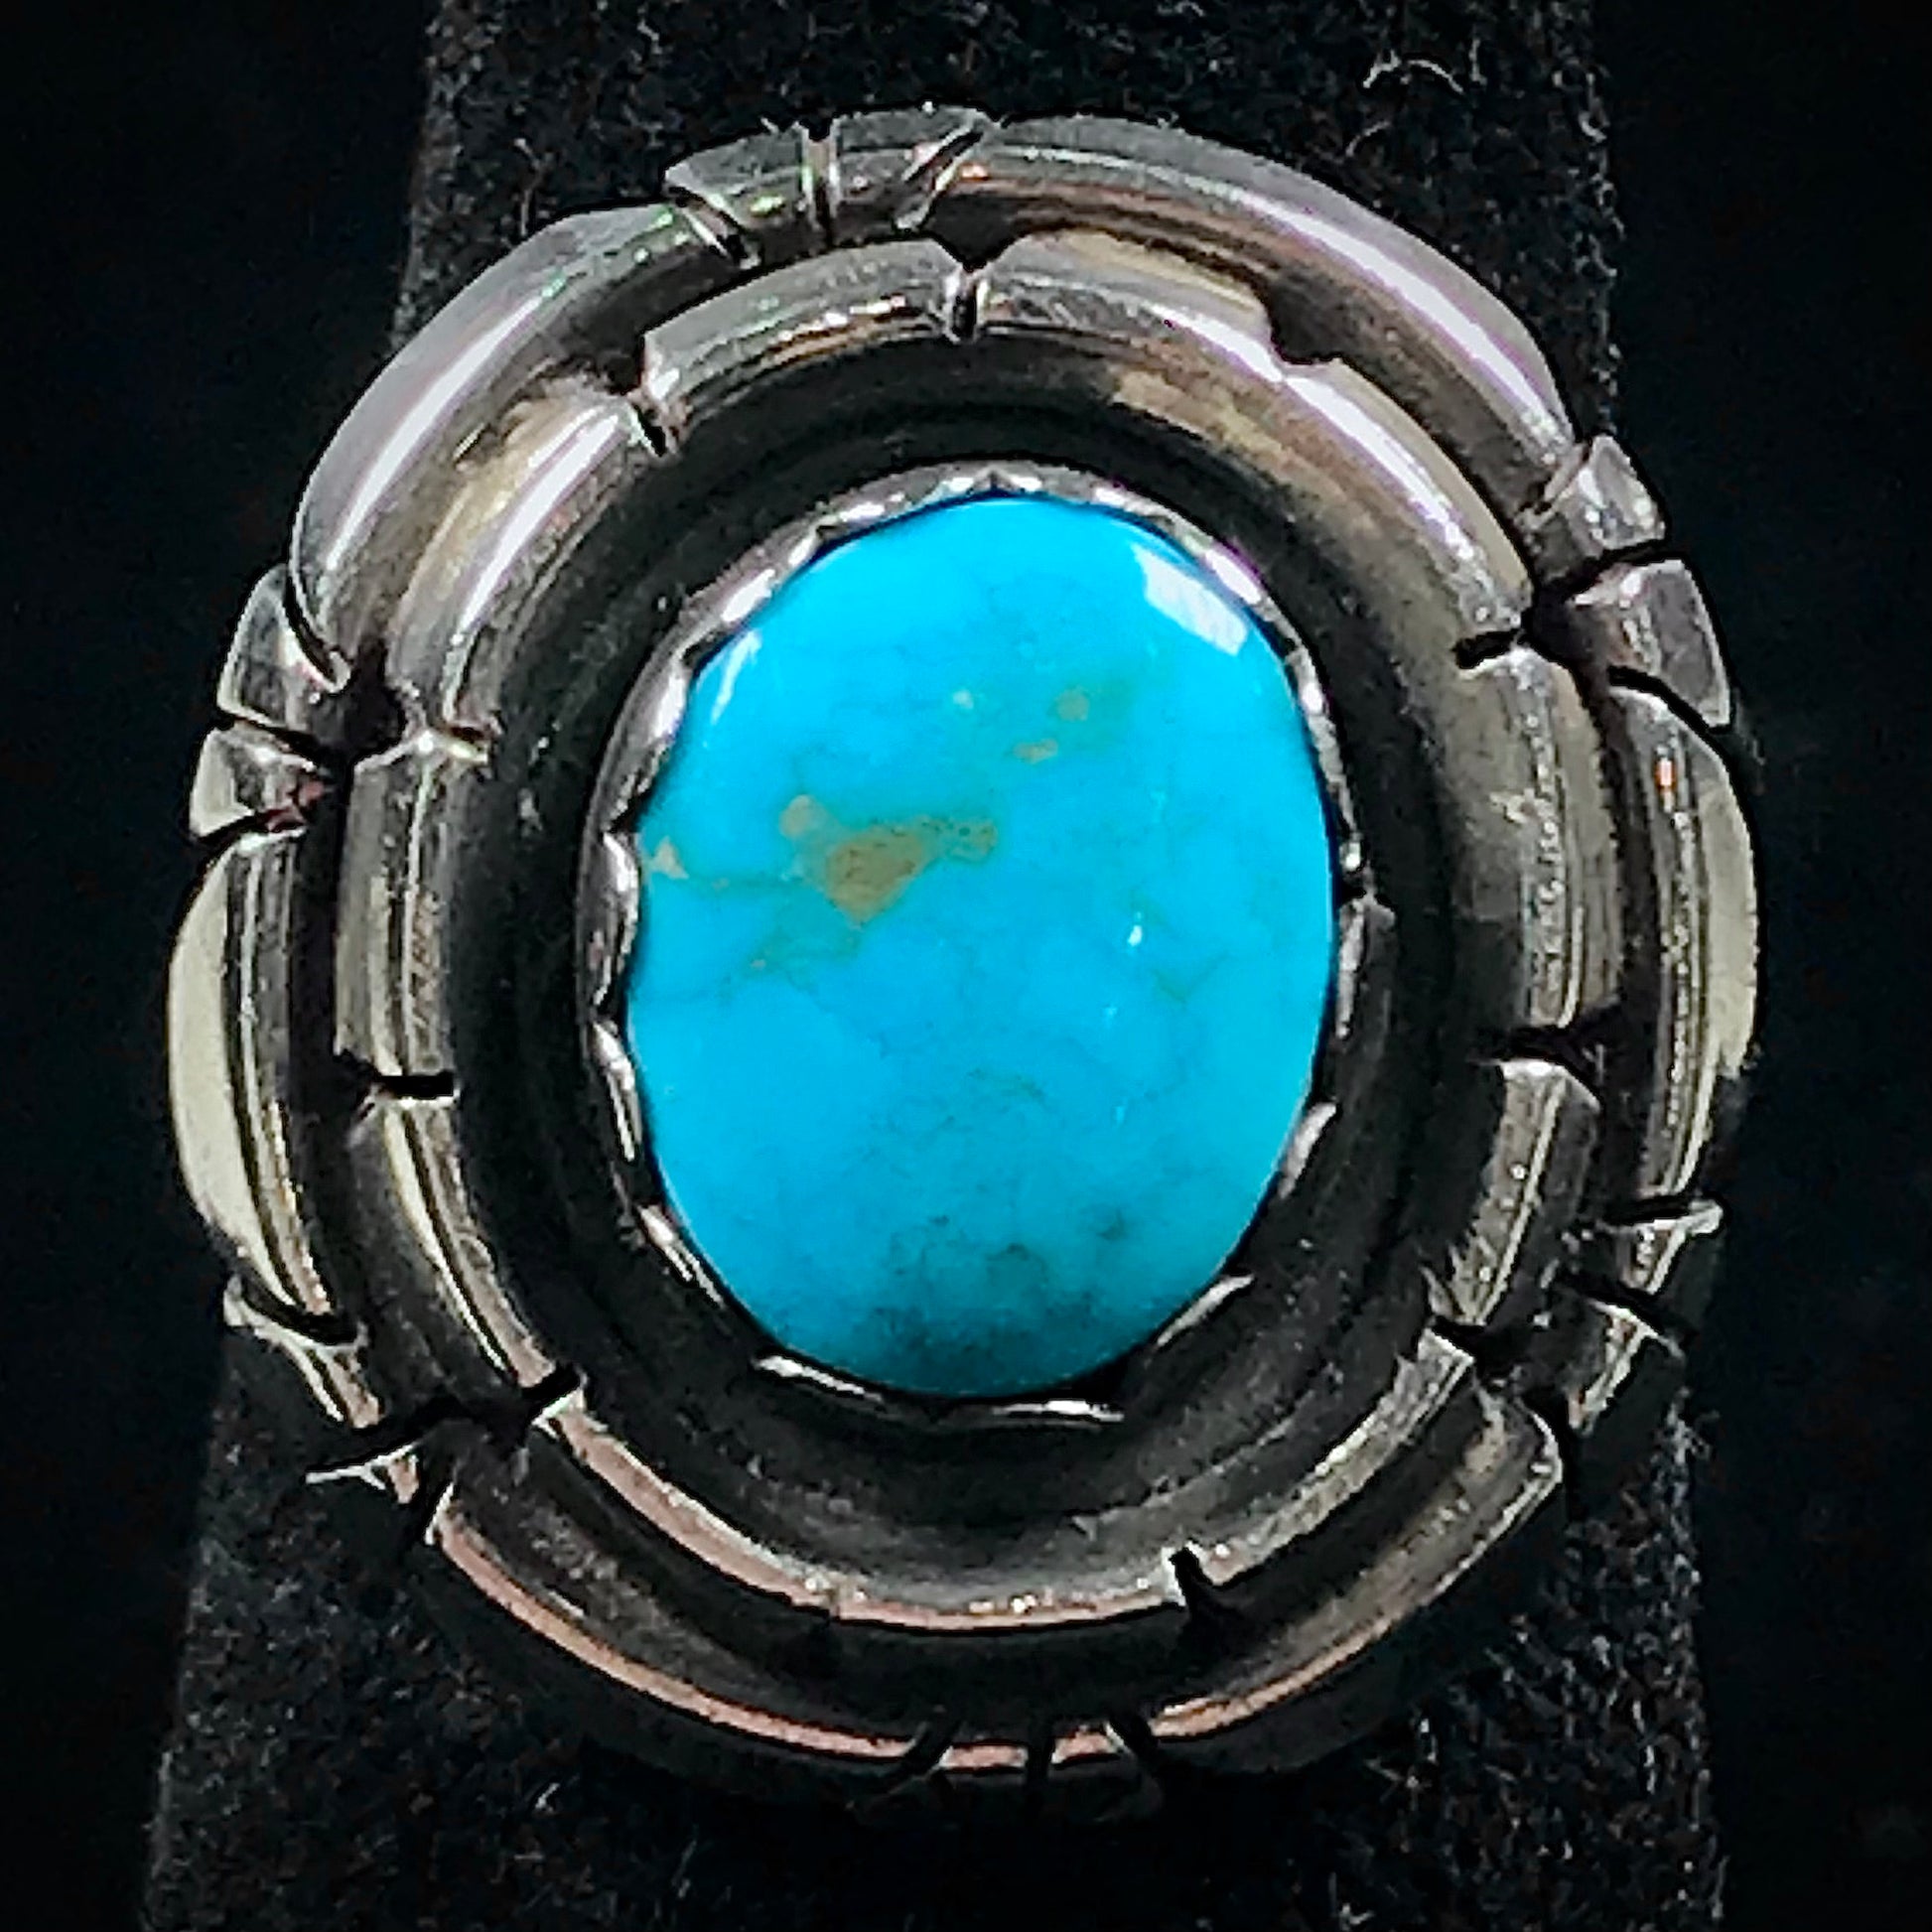 Native American Kingman turquoise ring set in sterling silver. 